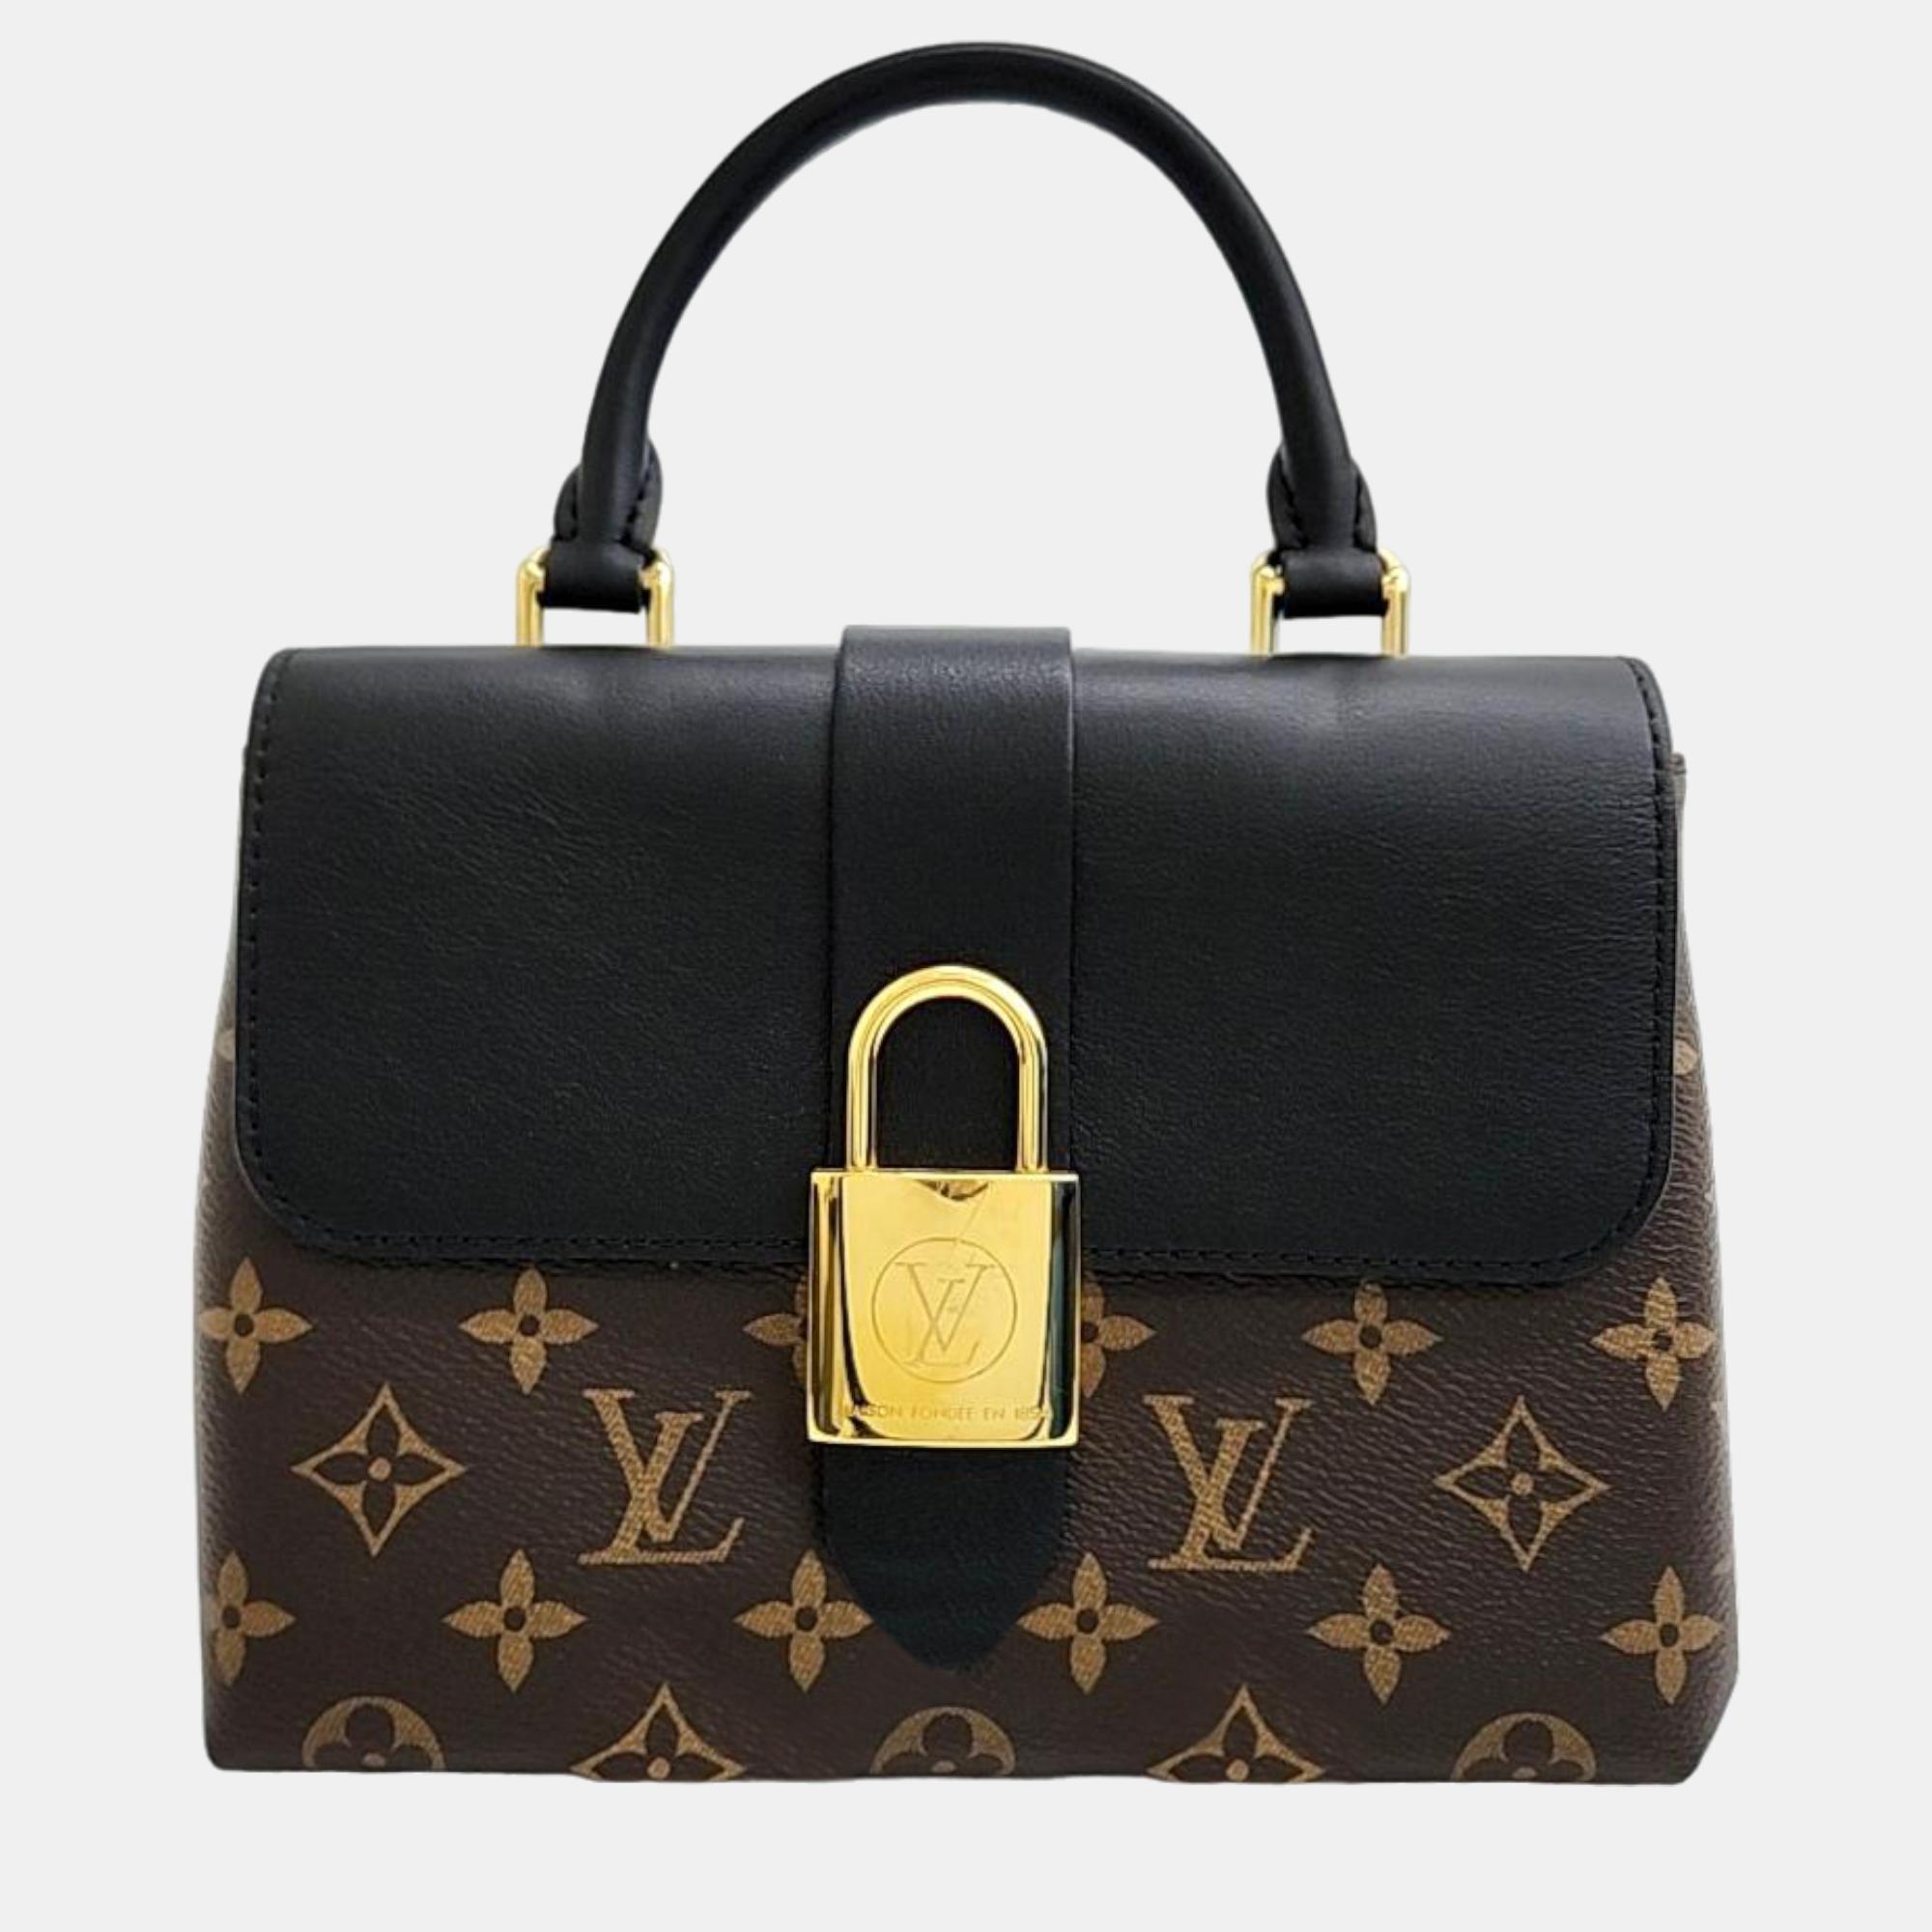 Louis vuitton black/brown canvas and leather rocky bb top handle bag